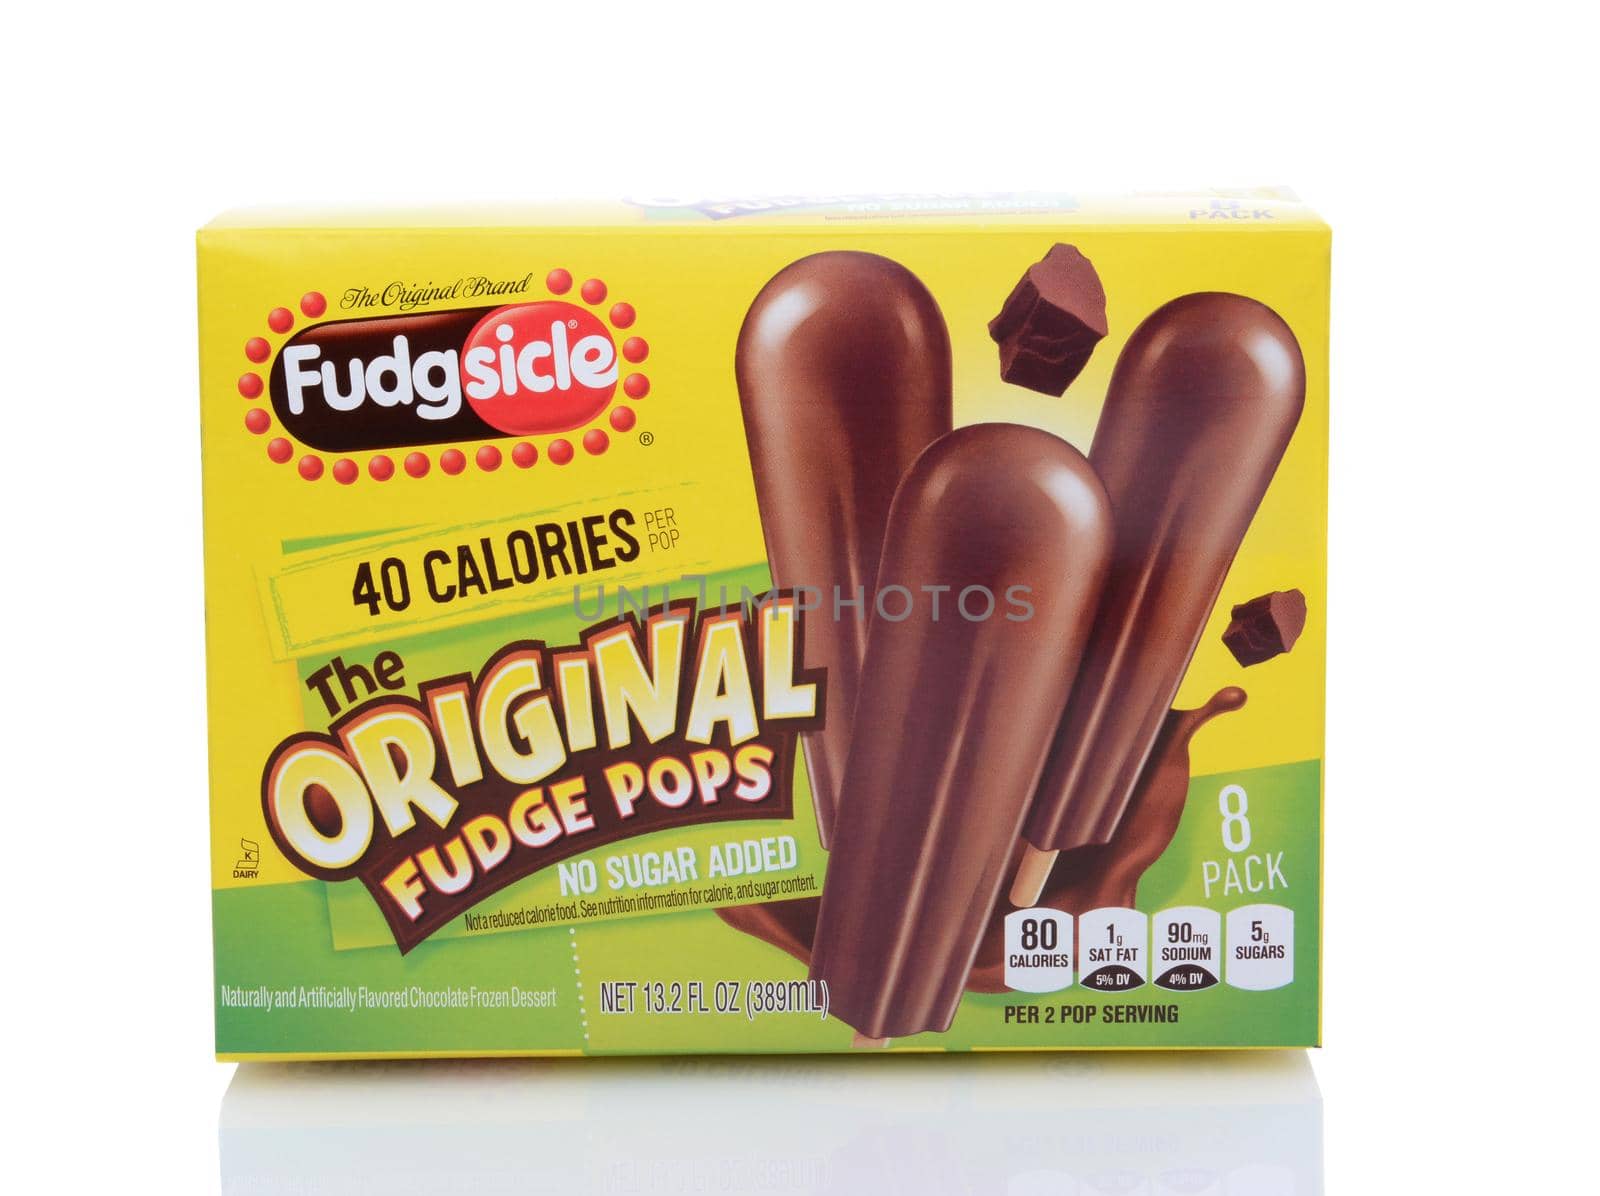 IRVINE, CA - May 14, 2014: An 8 pack of Fudgsicle Brand frozen dessert bars. Fudgsicle is a registered trademark of Unilever.